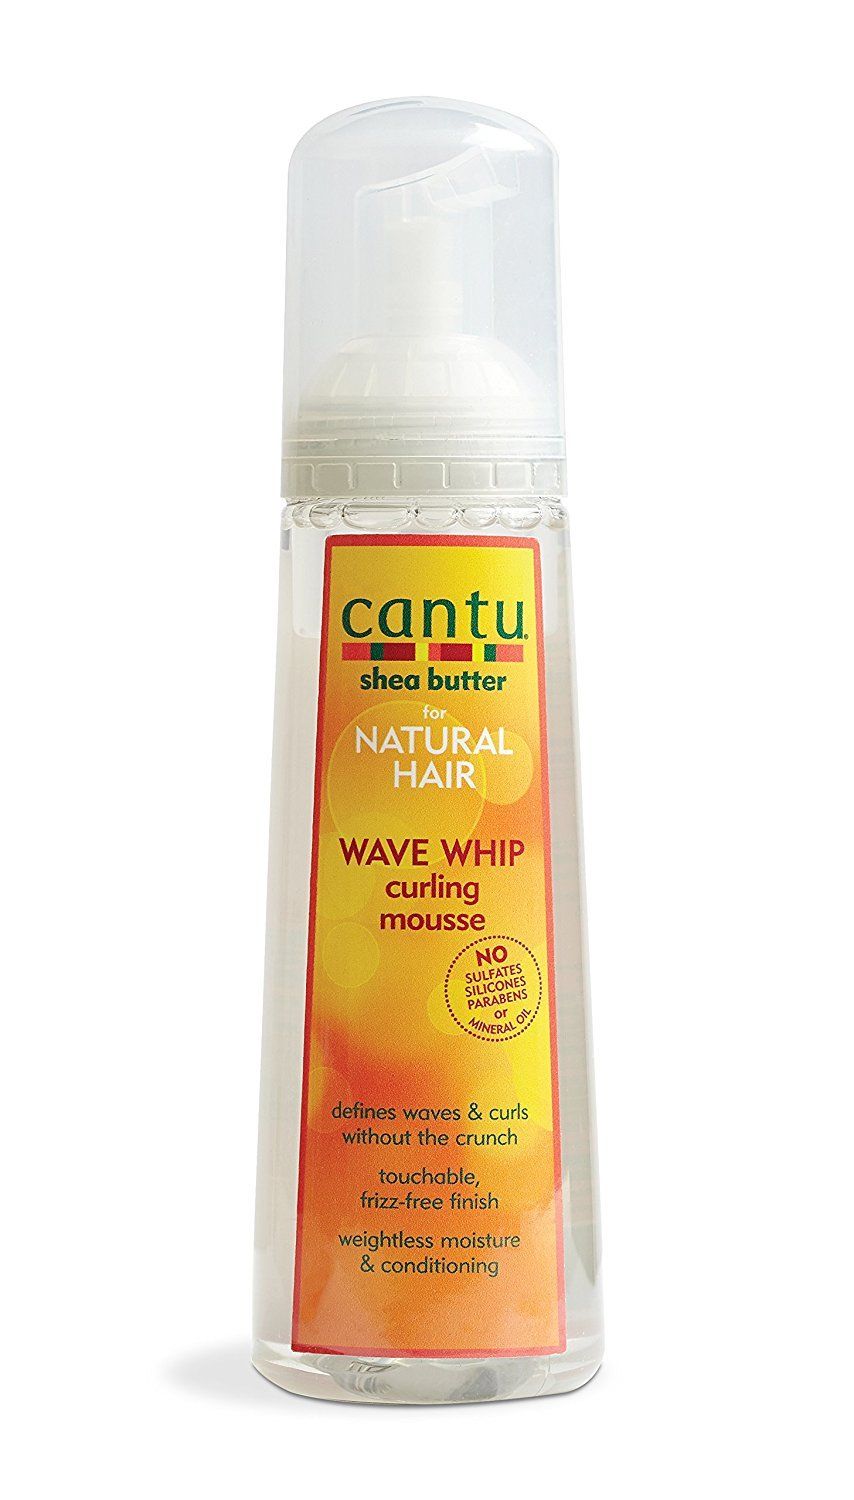 Cantu Shea Butter for Natural Hair Wave Whip Curling Mousse 238 g